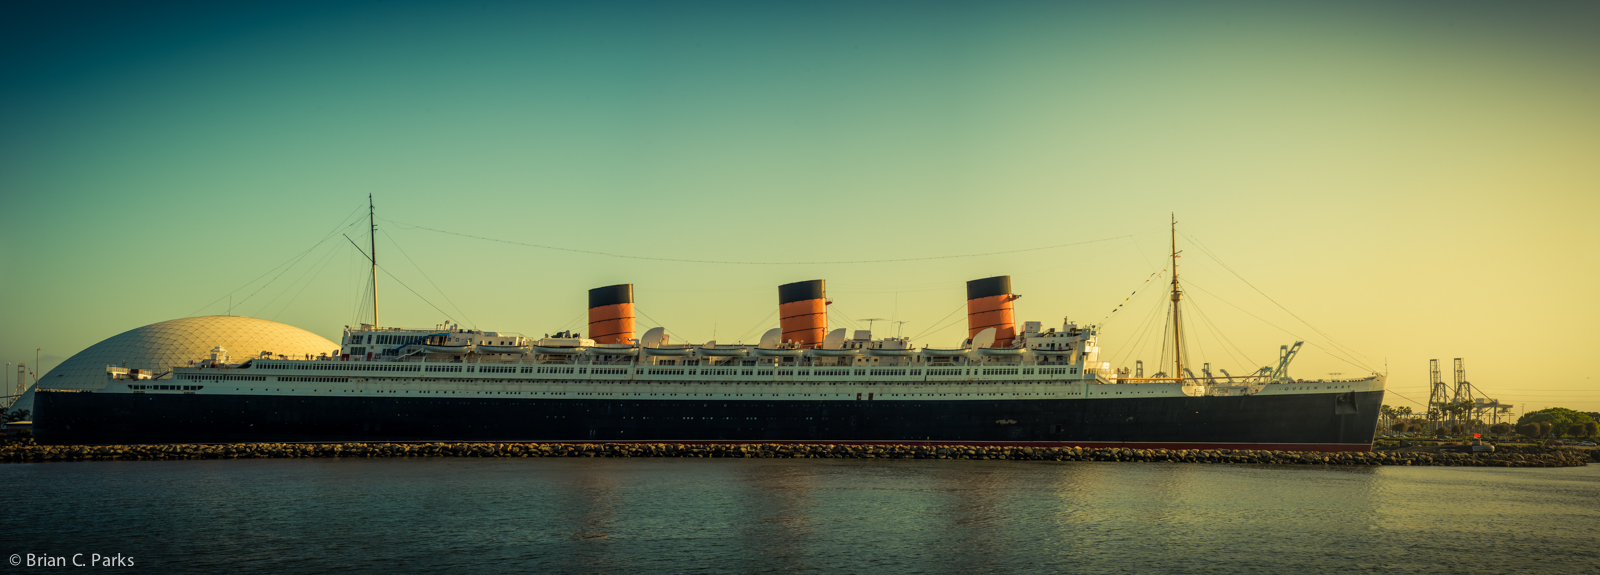 Queen Mary panoramic